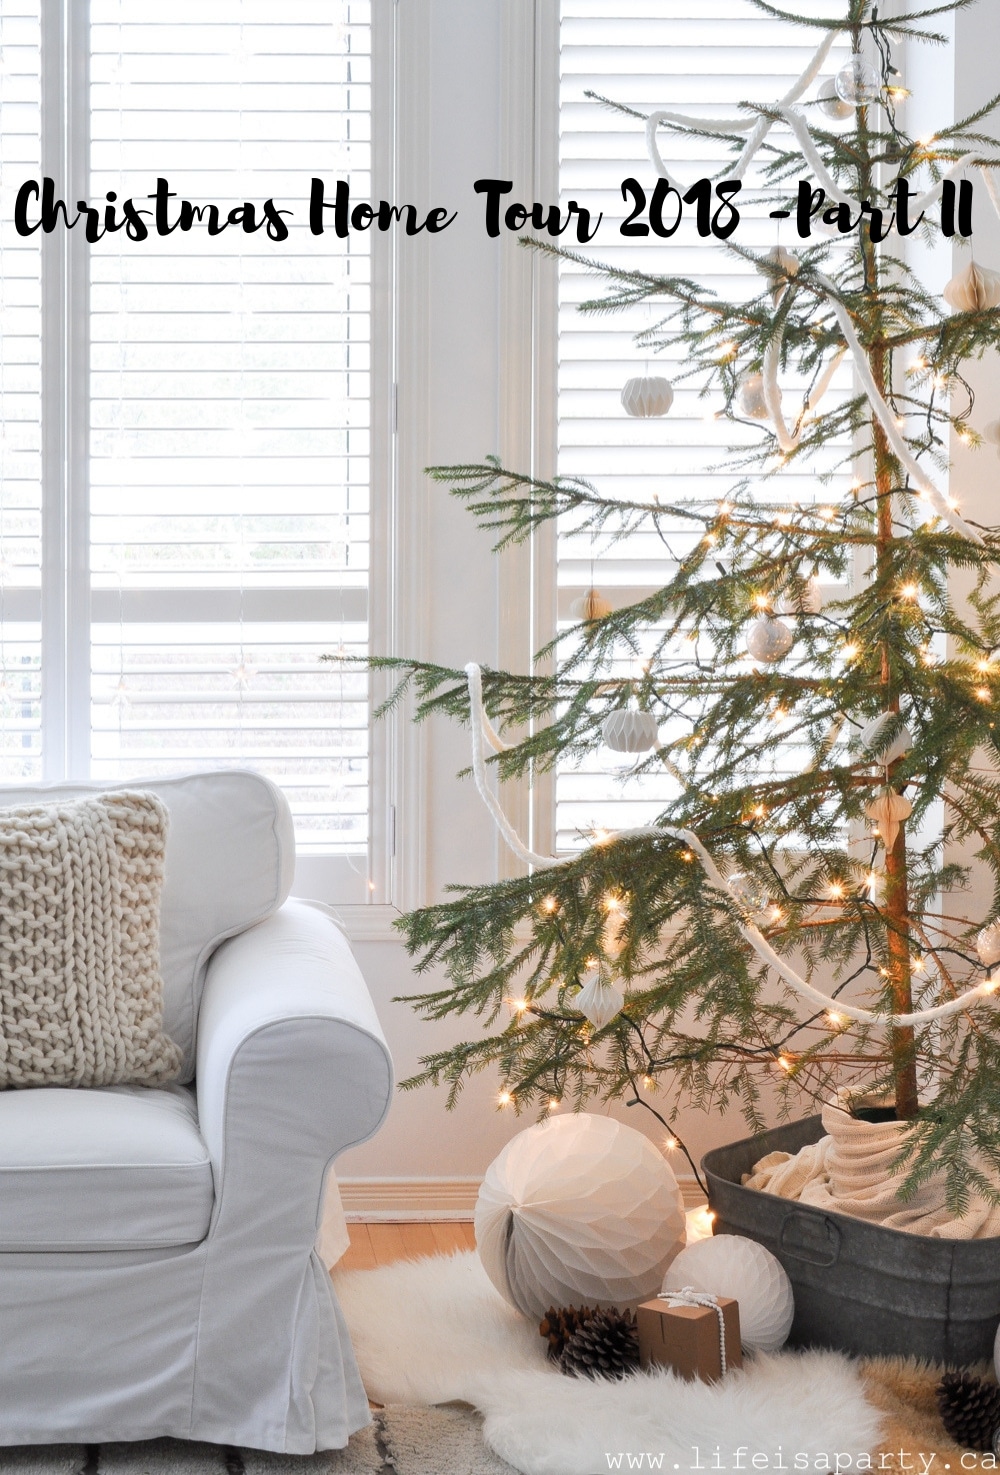 Scandinavian Christmas Decor Home Tour 2018 -Part II: Rustic Scandi design, lots of white and natural elements with some vintage Xmas pieces.